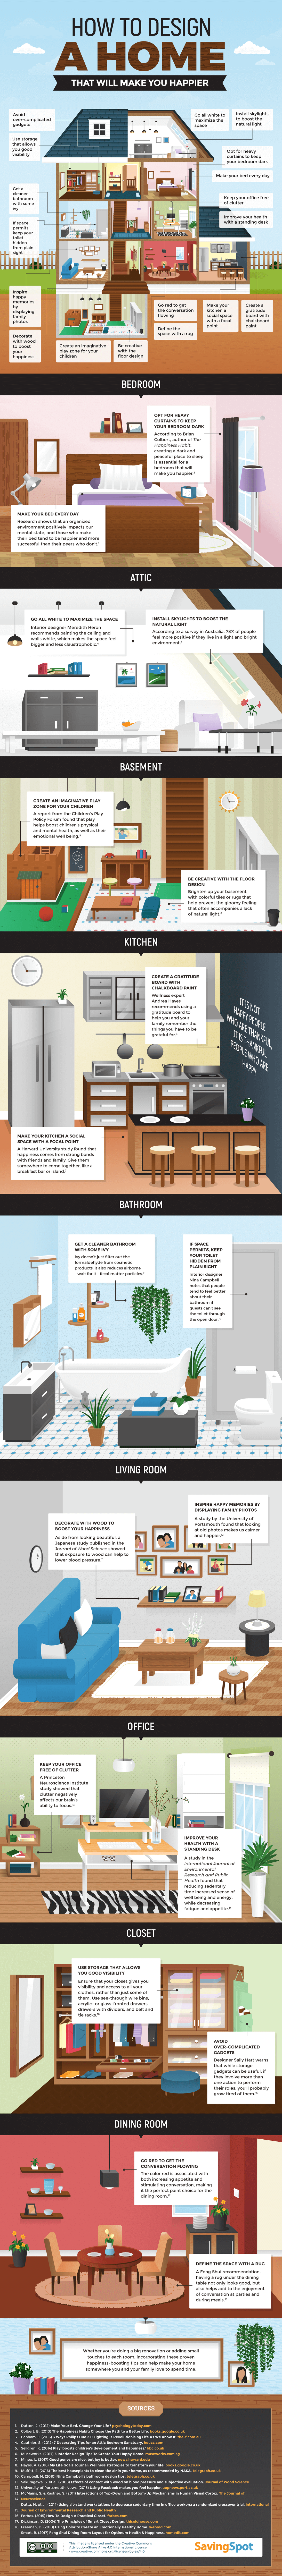 A Room-By-Room Guide to Designing a Home That Will Make You Happier: A home that balances being pleasant, relaxing, stimulating, private, yet sociable in a way that works for all inhabitants is a house that’s geared towards happiness. #home #home design #homedecor #happy #happiness #happyhome #family 